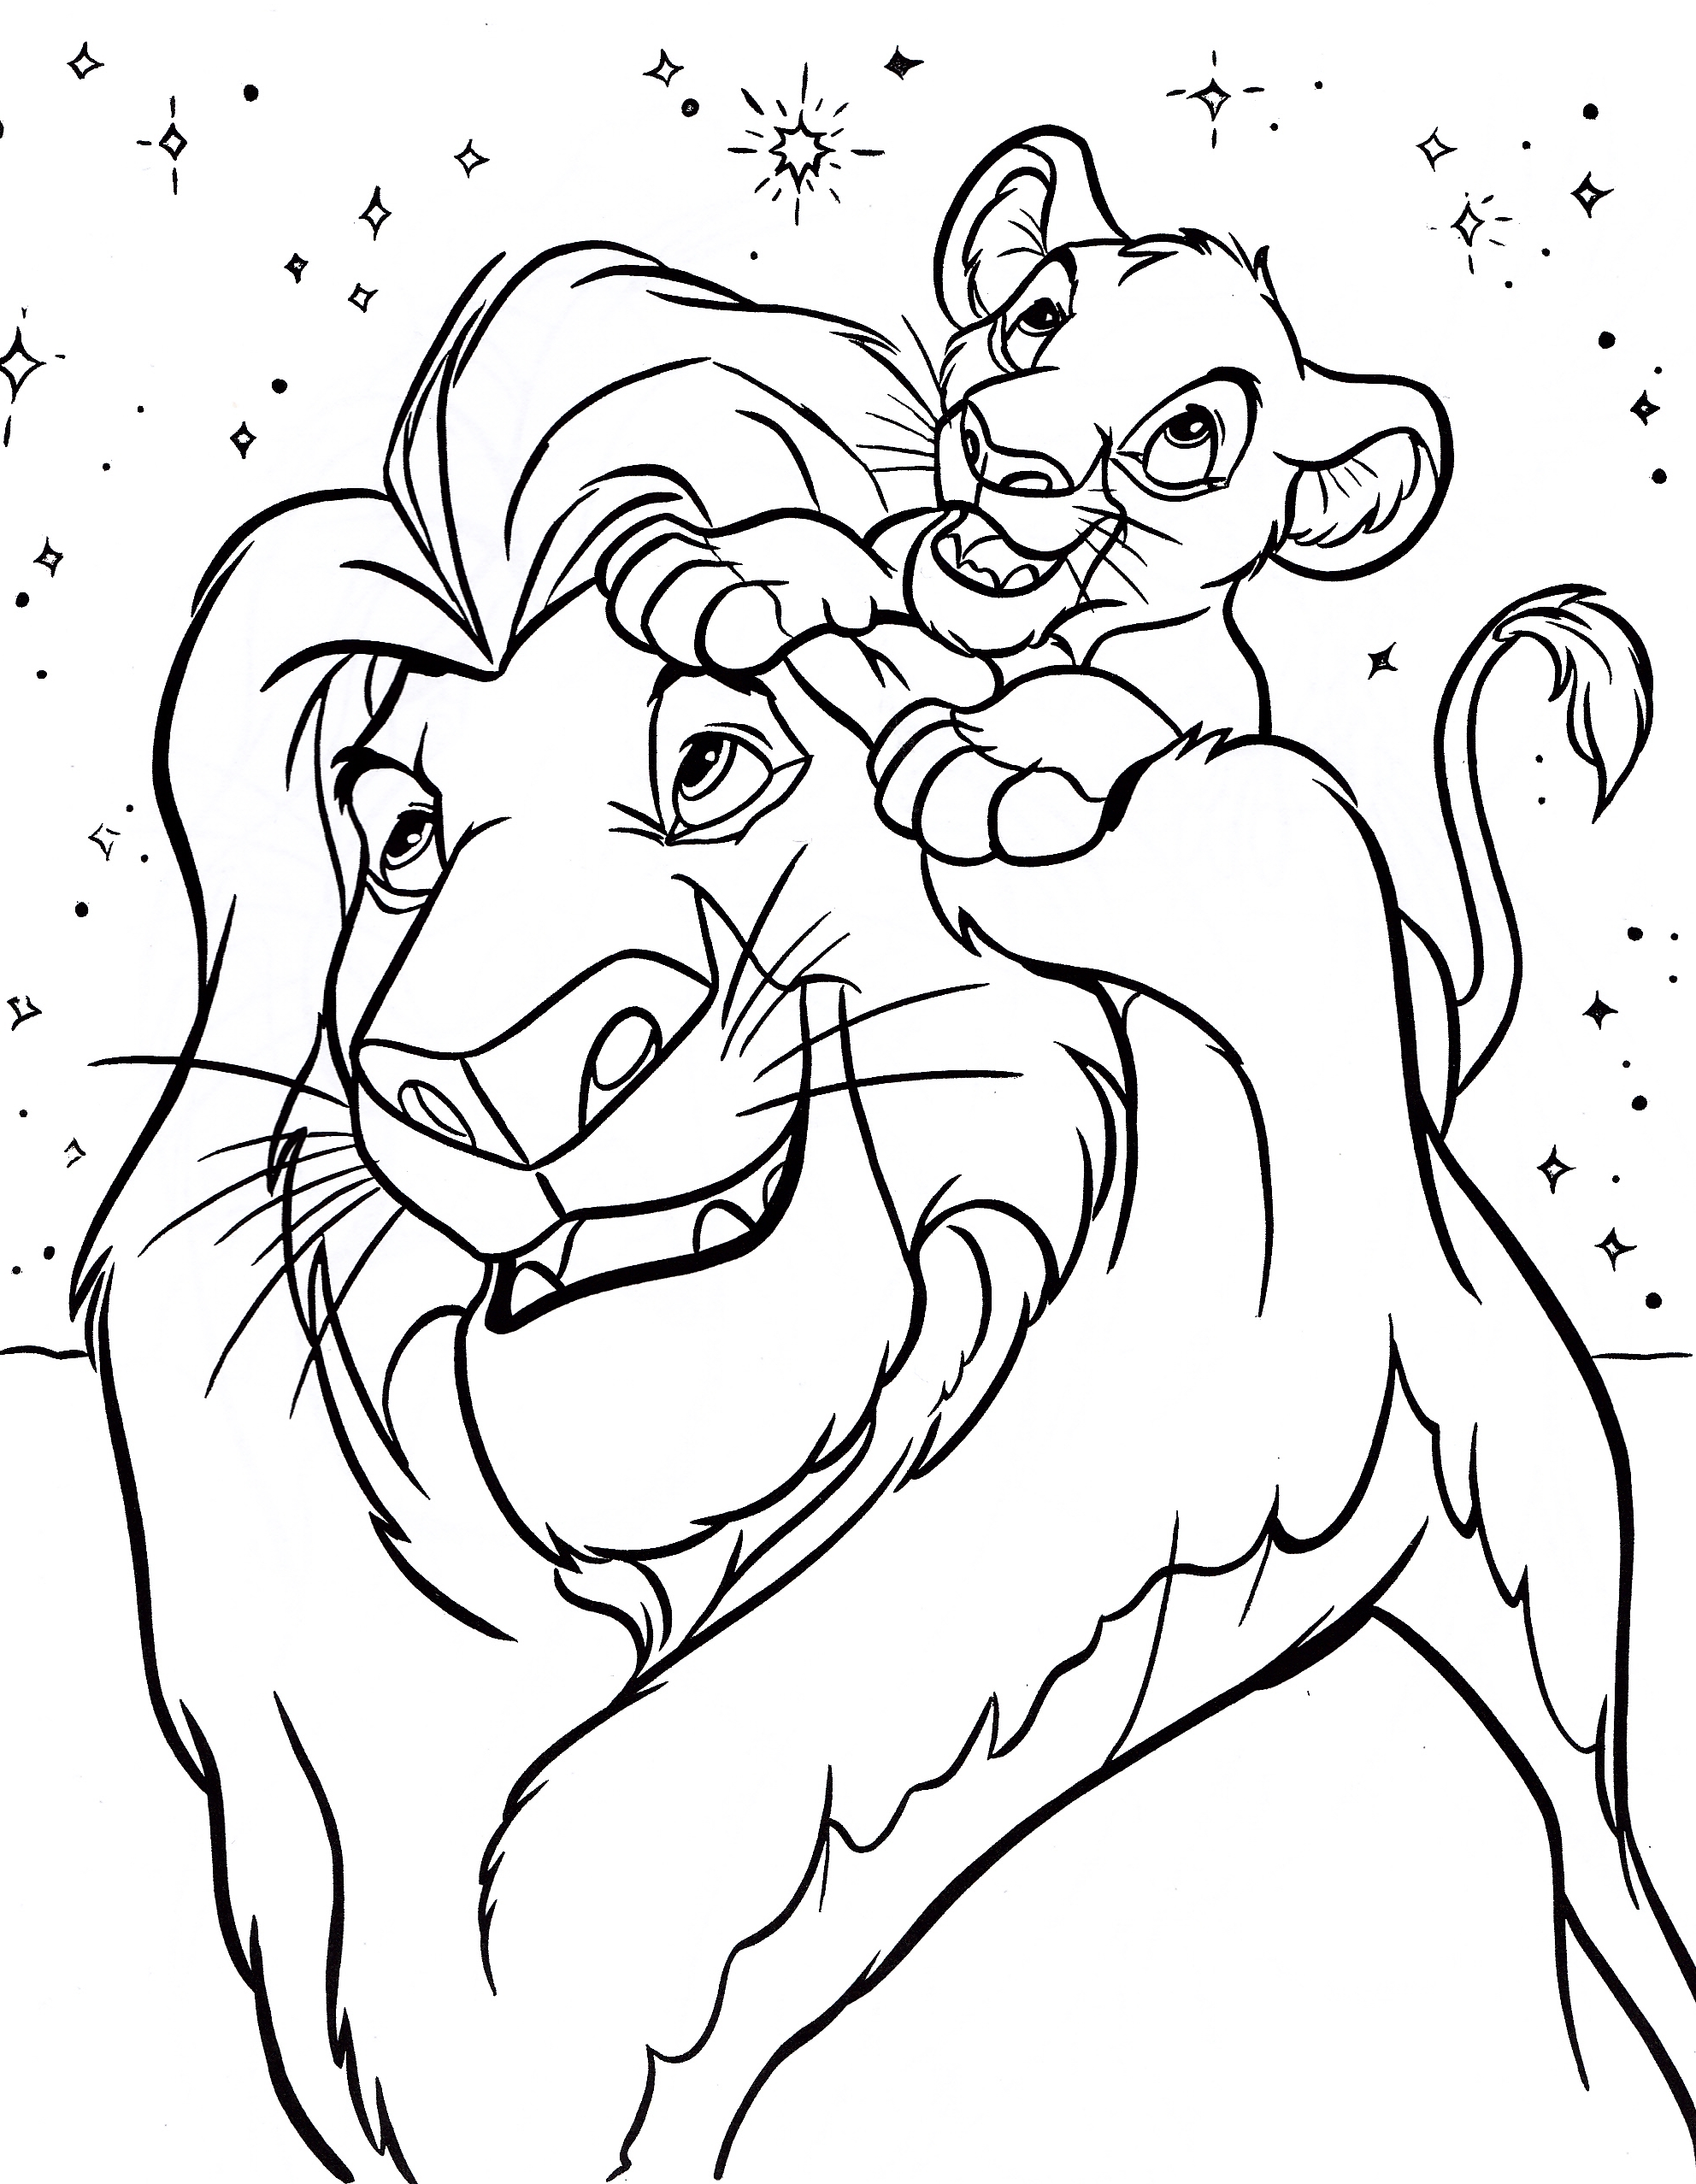 Disney Coloring Pages (10) - Coloring Kids